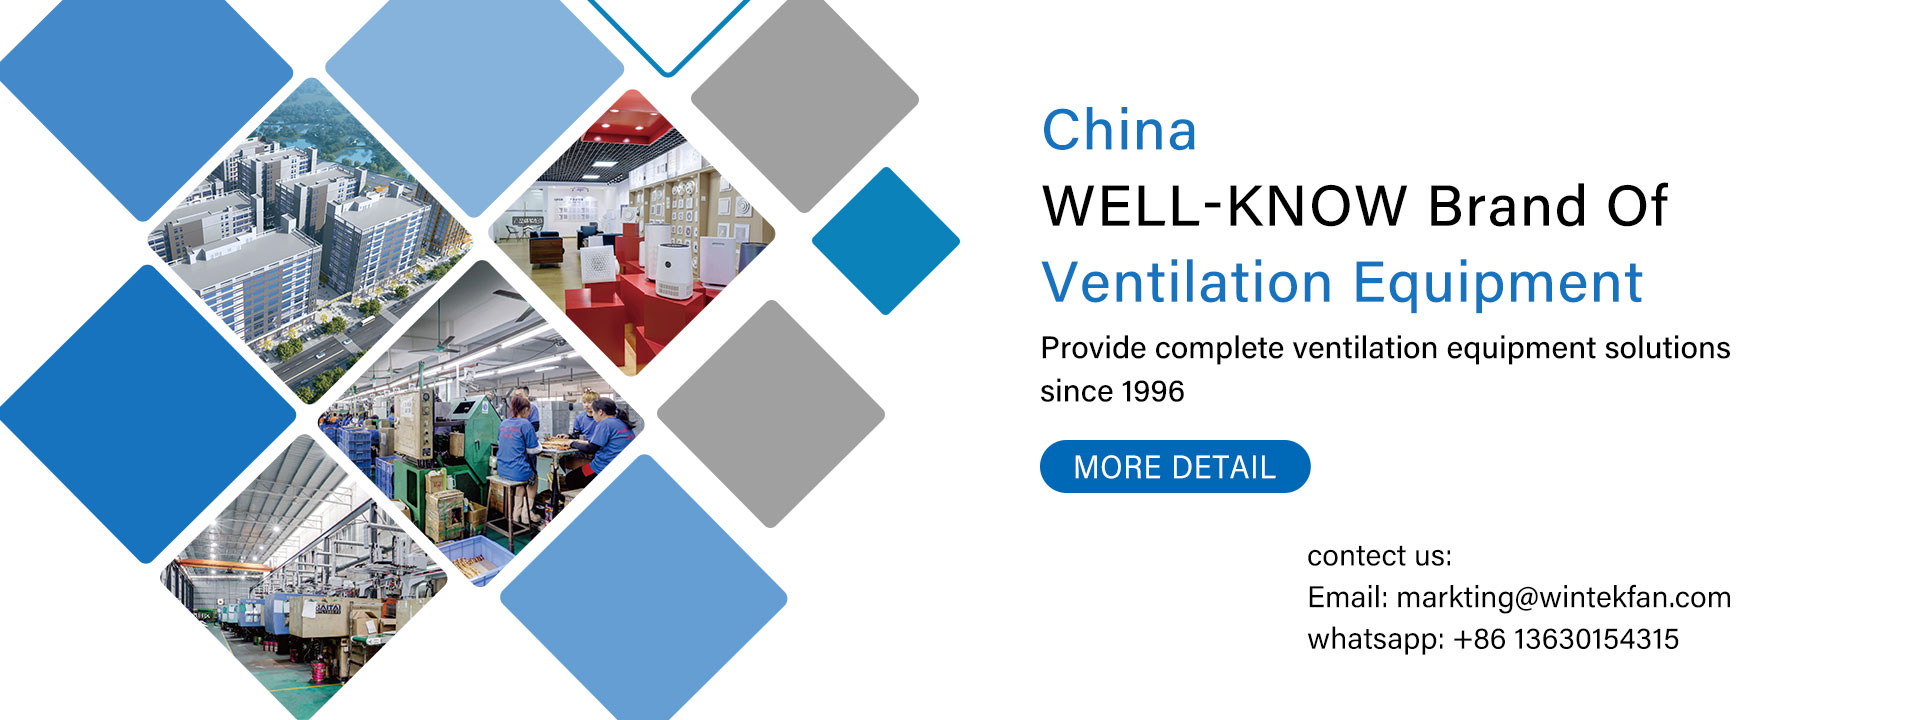 manufactuer of high-quality ventilation equipment